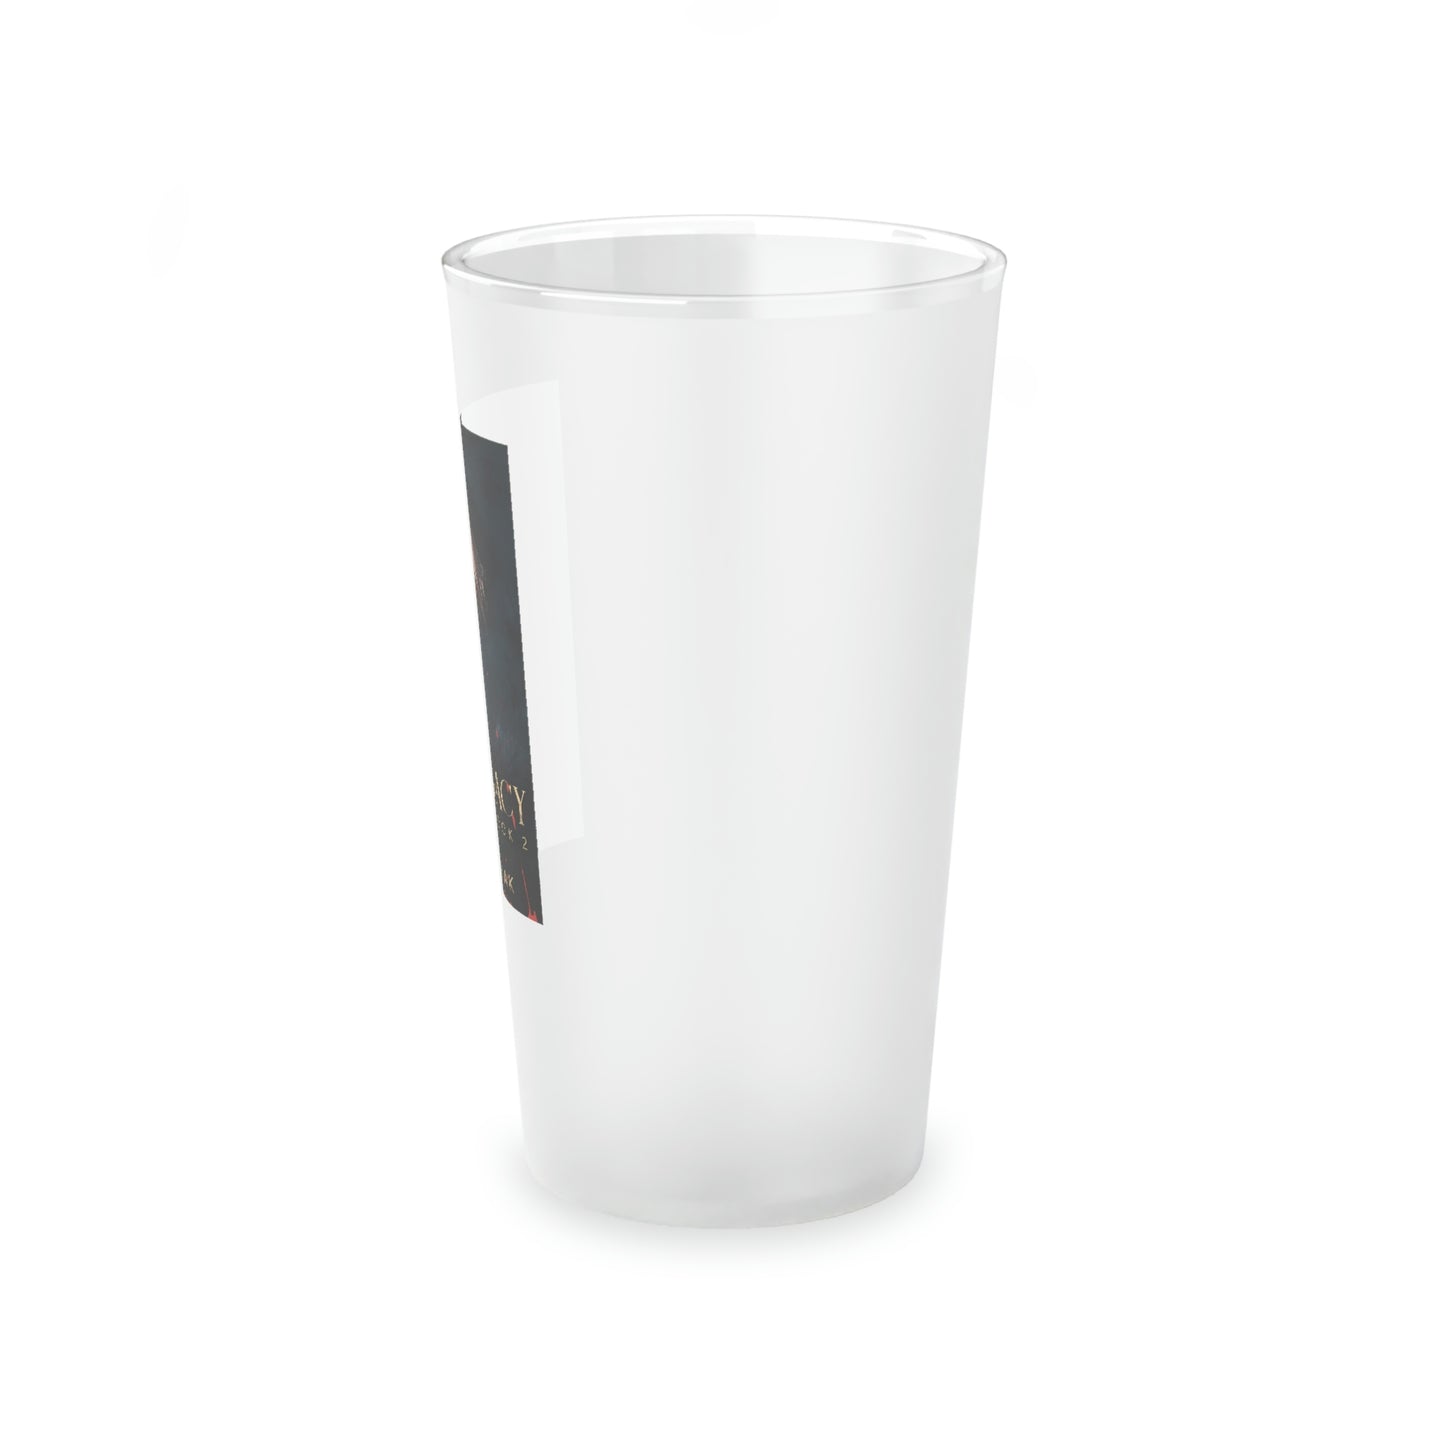 The Legacy - Frosted Pint Glass